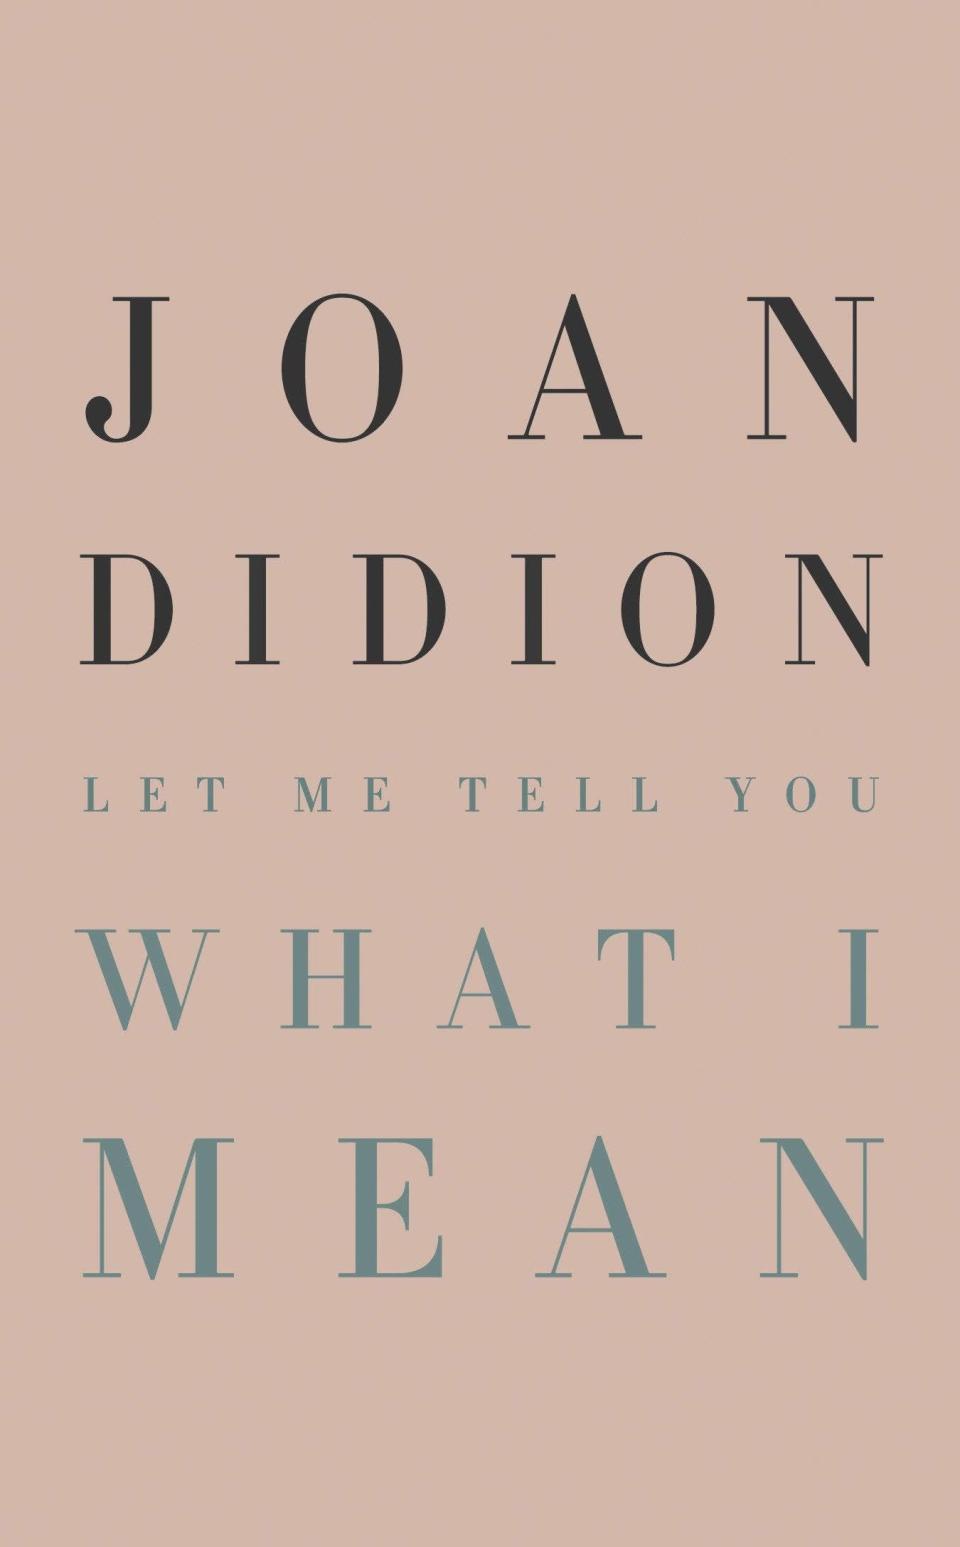 <strong>Georgia Murray, Fashion Editor</strong><br><br><strong>Book: </strong><em>Let Me Tell You What I Mean</em> by Joan Didion<br><br><strong>Why is it your February read? </strong>A new collection gathering essays written in the early years of her career, I can’t wait to get stuck into the inimitable Didion’s musings on everything from Gamblers Anonymous meetings and a Las Vegas reunion of WWII vets to Martha Stewart and Robert Mapplethorpe. Spanning politics, her own writing process, self-doubt and, of course, California, if it’s anything like the rest of Didion’s sharp, wise and witty work, it’ll be a welcome retreat from lockdown life. <br><br><strong>Joan Didion</strong> Let Me Tell You What I Mean, $, available at <a href="https://uk.bookshop.org/books/let-me-tell-you-what-i-mean/9780008451752" rel="nofollow noopener" target="_blank" data-ylk="slk:bookshop.org" class="link rapid-noclick-resp">bookshop.org</a>